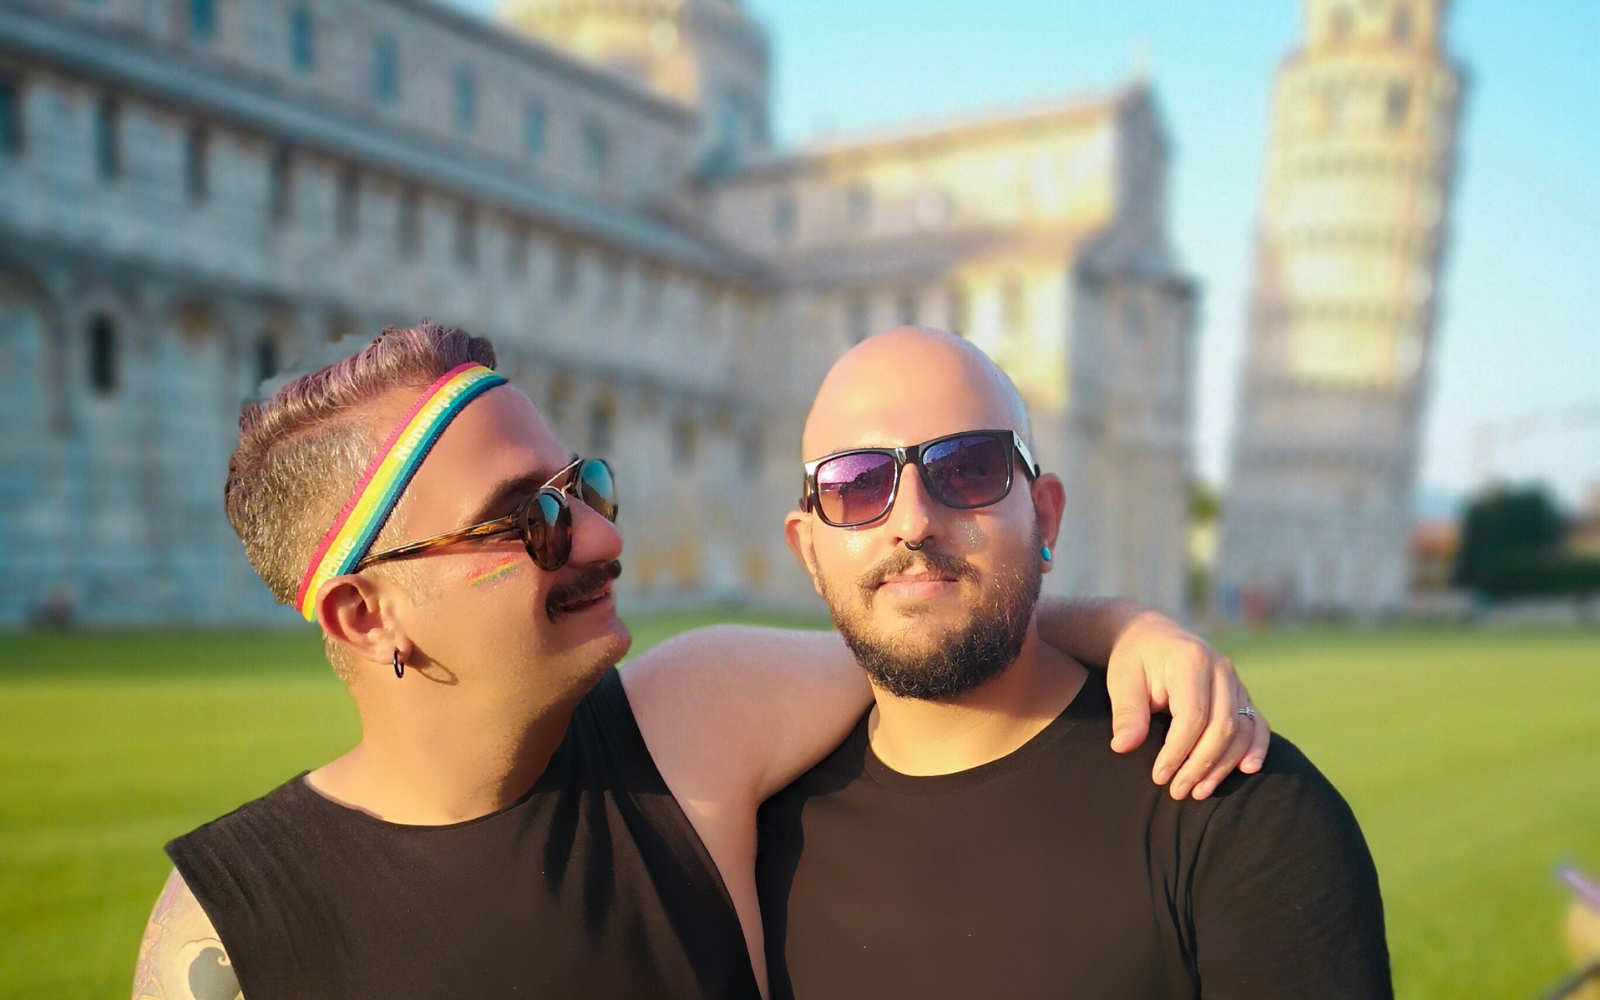 Gayly Planet at Pisa Pride in 2019